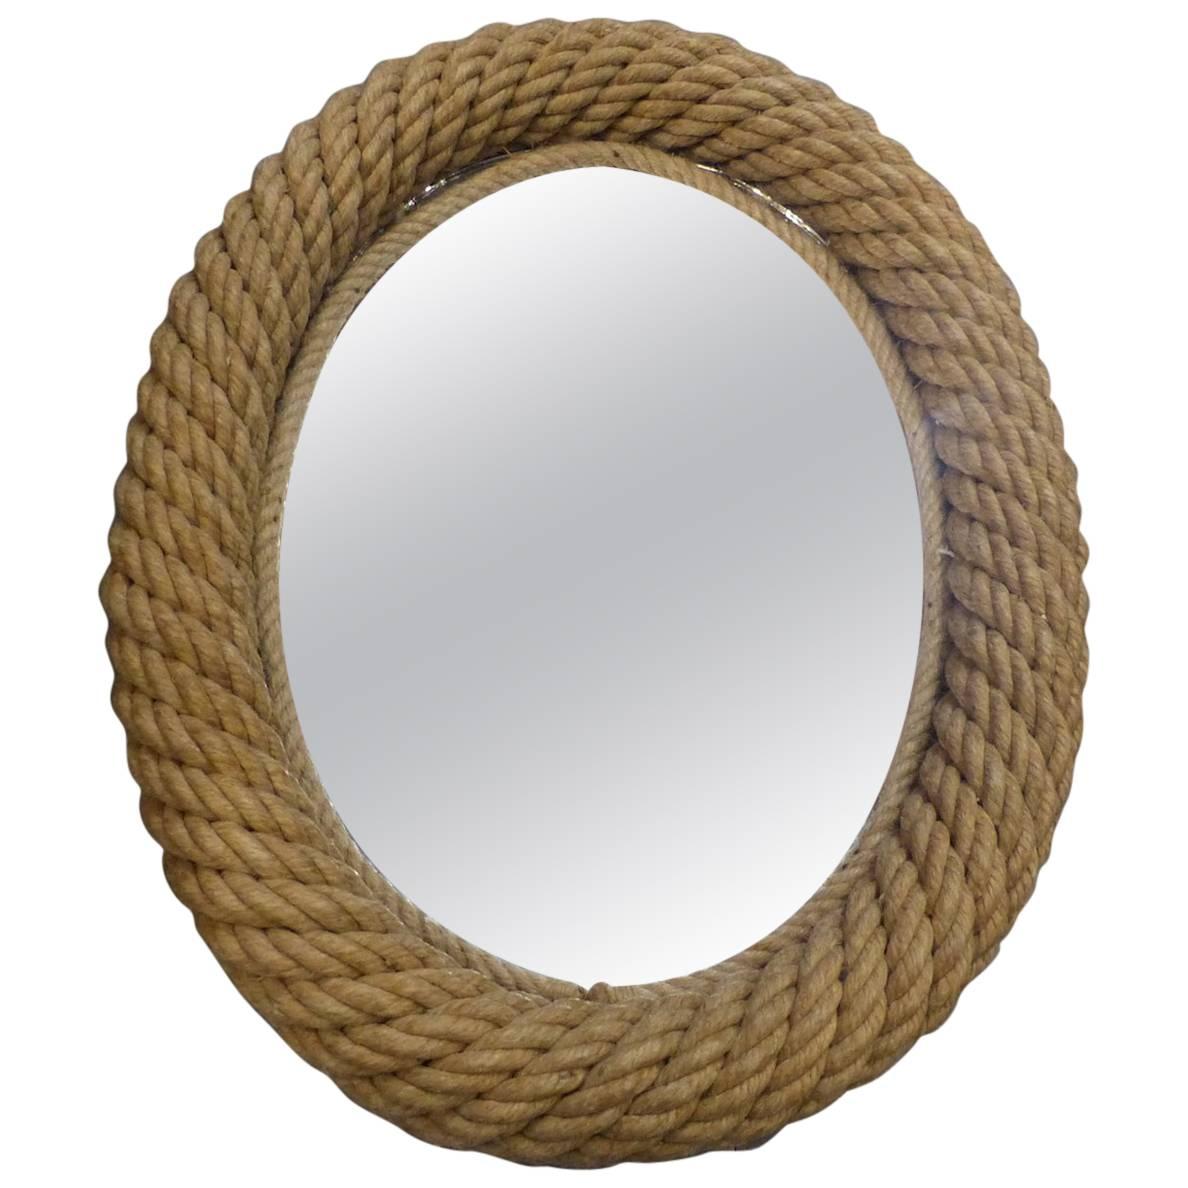 Beautiful Adrien Audoux and Frida Minet Rope Oval Mirror, circa 1960 For Sale